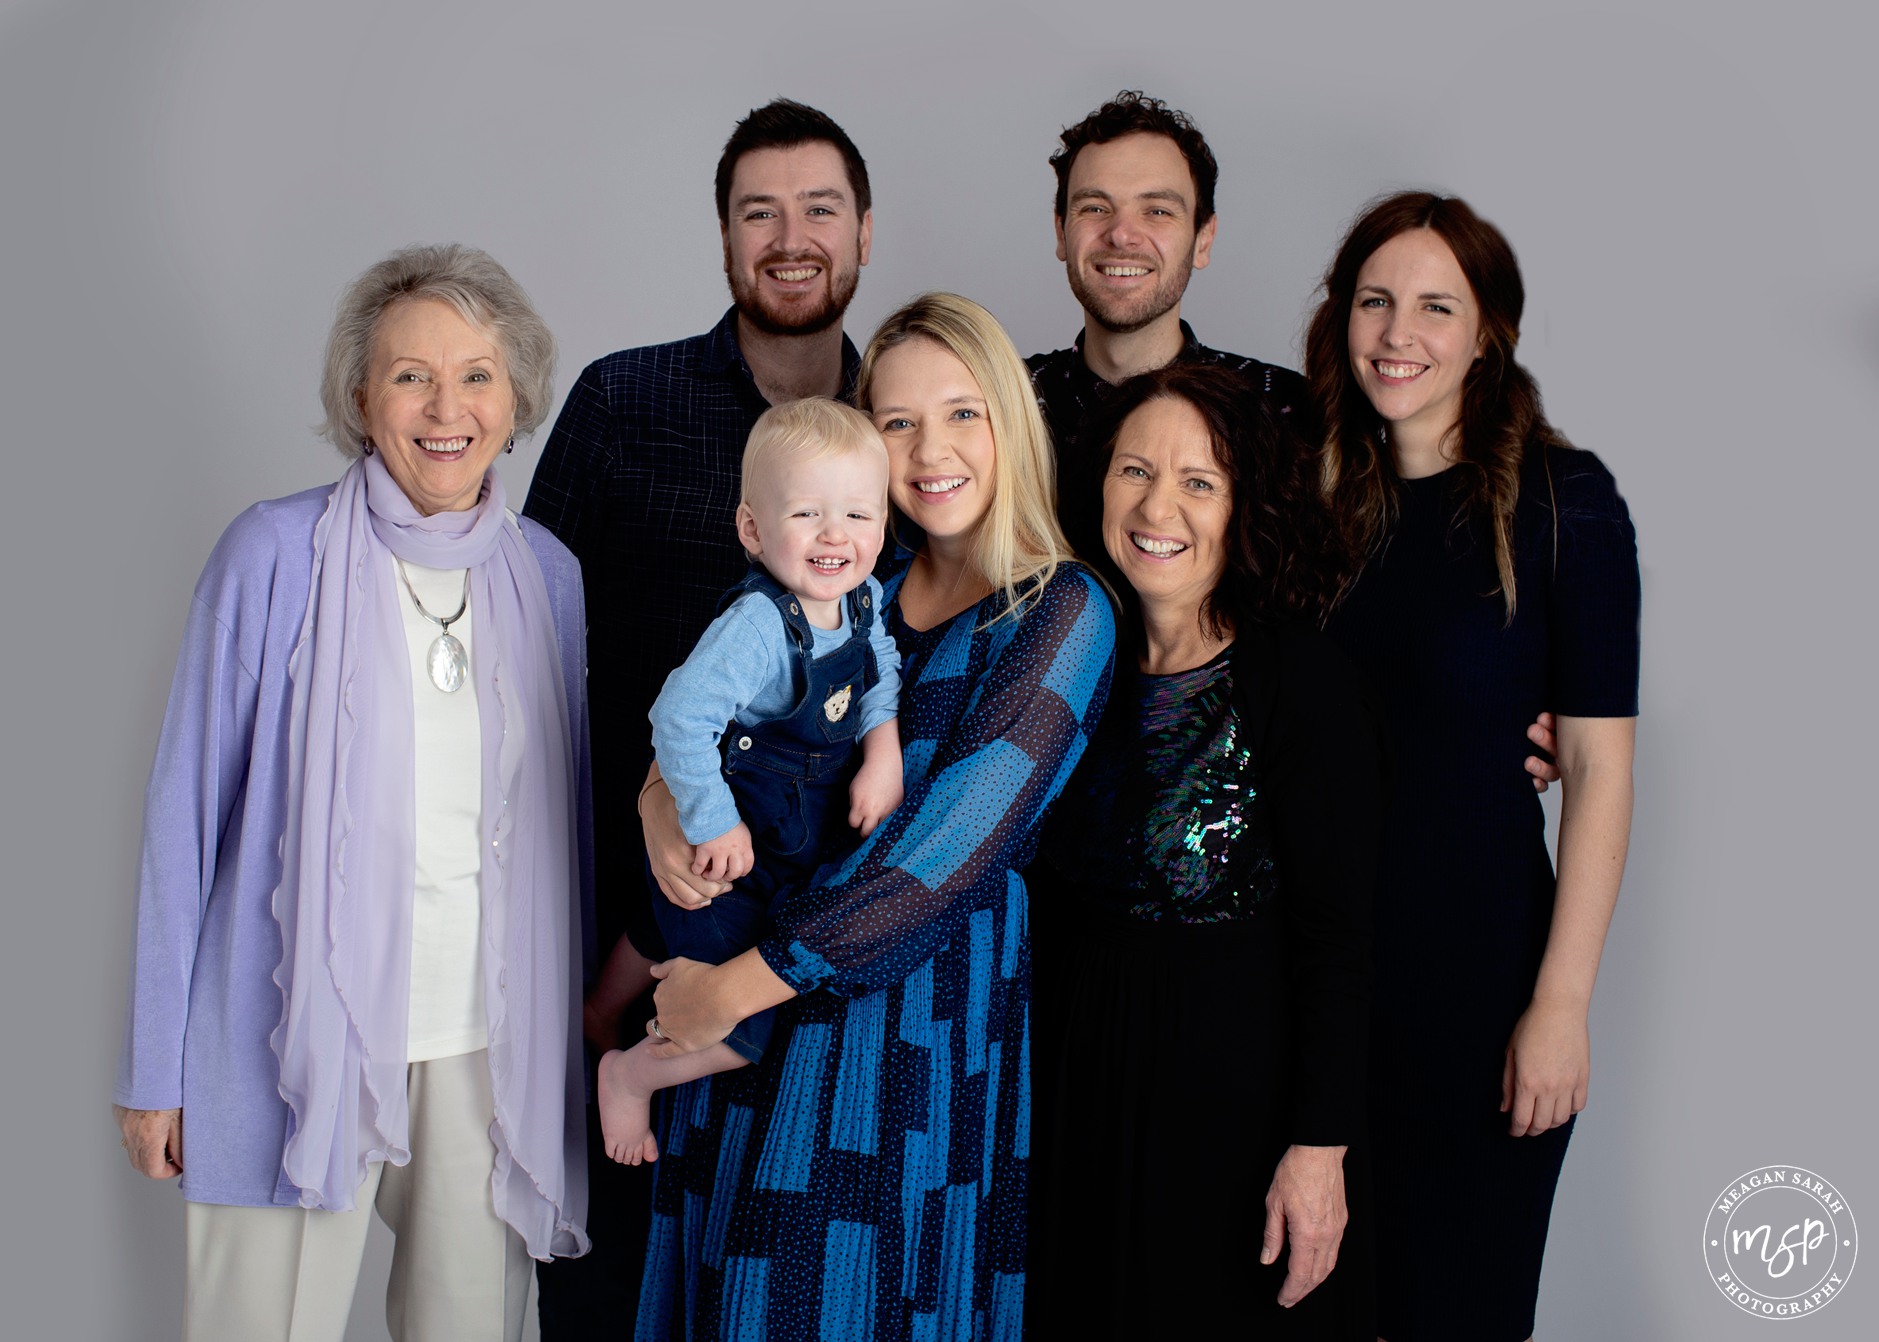 Family,Portrait,Group,Family of 7,Affordable photographer leeds,Fun Photos,Horsforth,Leeds,Little Ones,Meagan Sarah Photography,Photographs,Pictures,Professional Photographer in Leeds,Studio,White background,West Yorkshire Photographer,